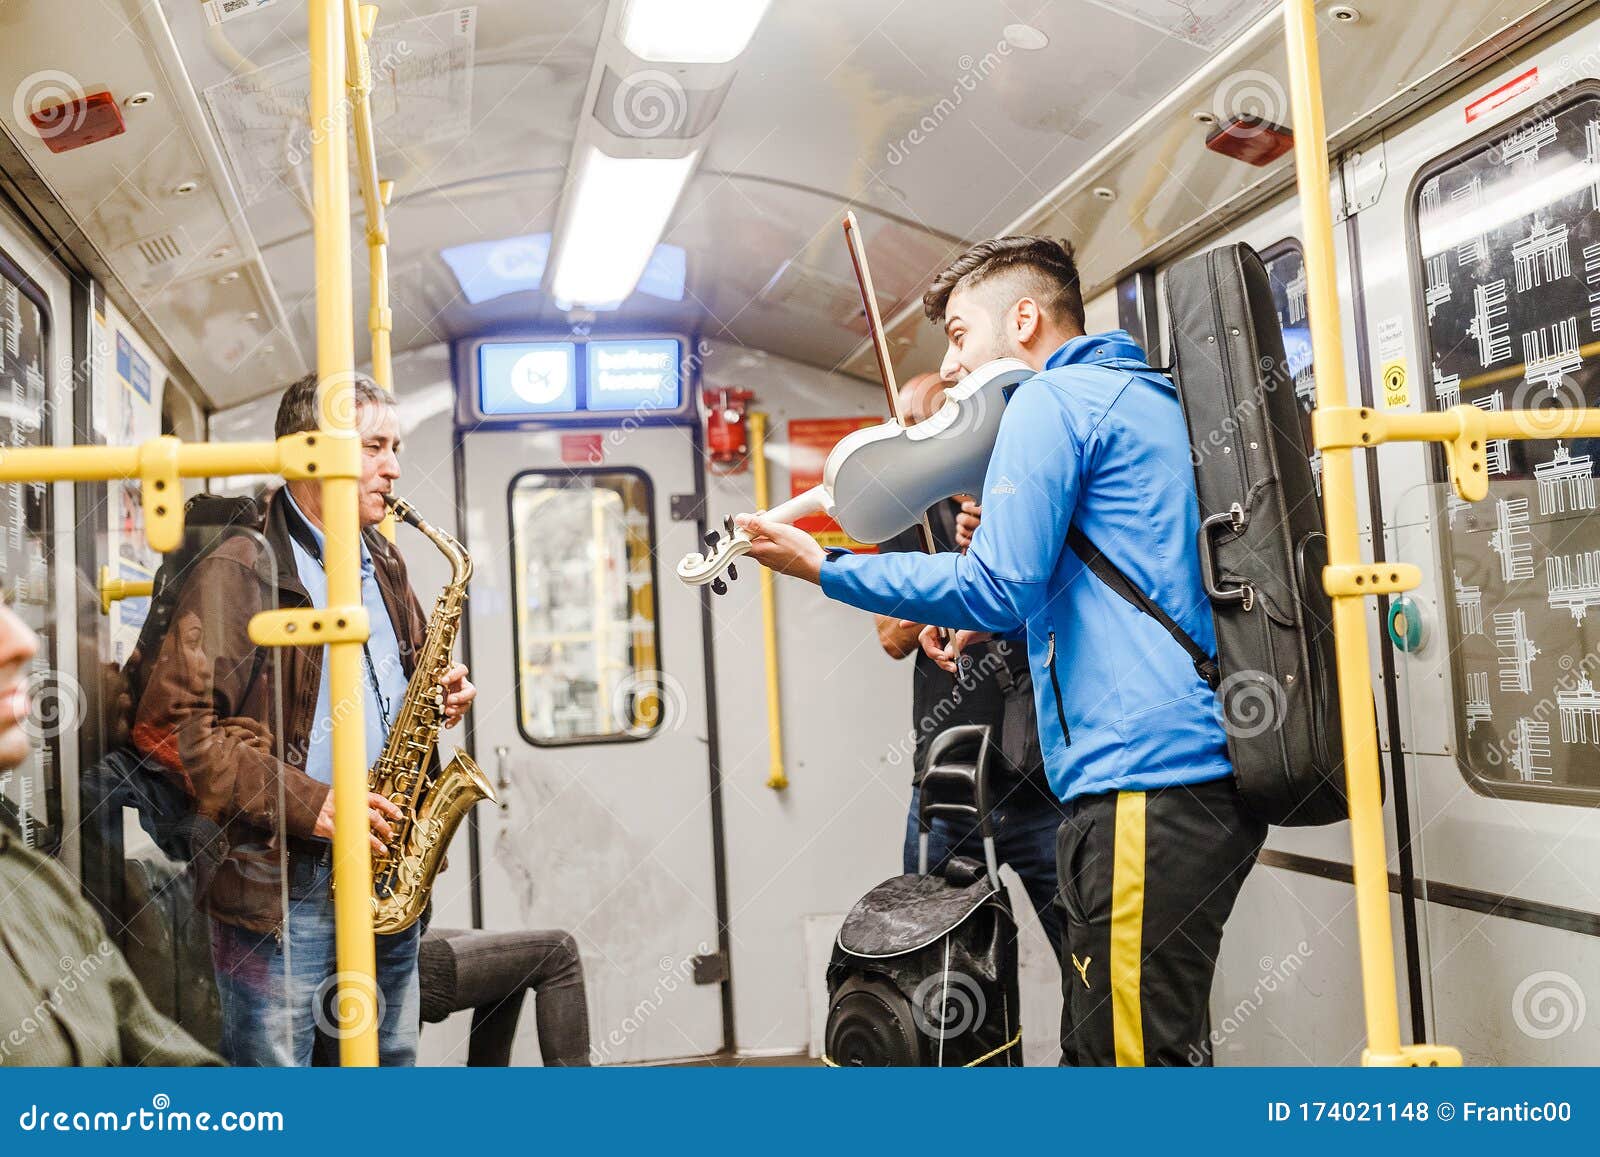 Musician Group Playing Playing Music in Metro Editorial Stock Photo - Image  of musical, male: 174021148